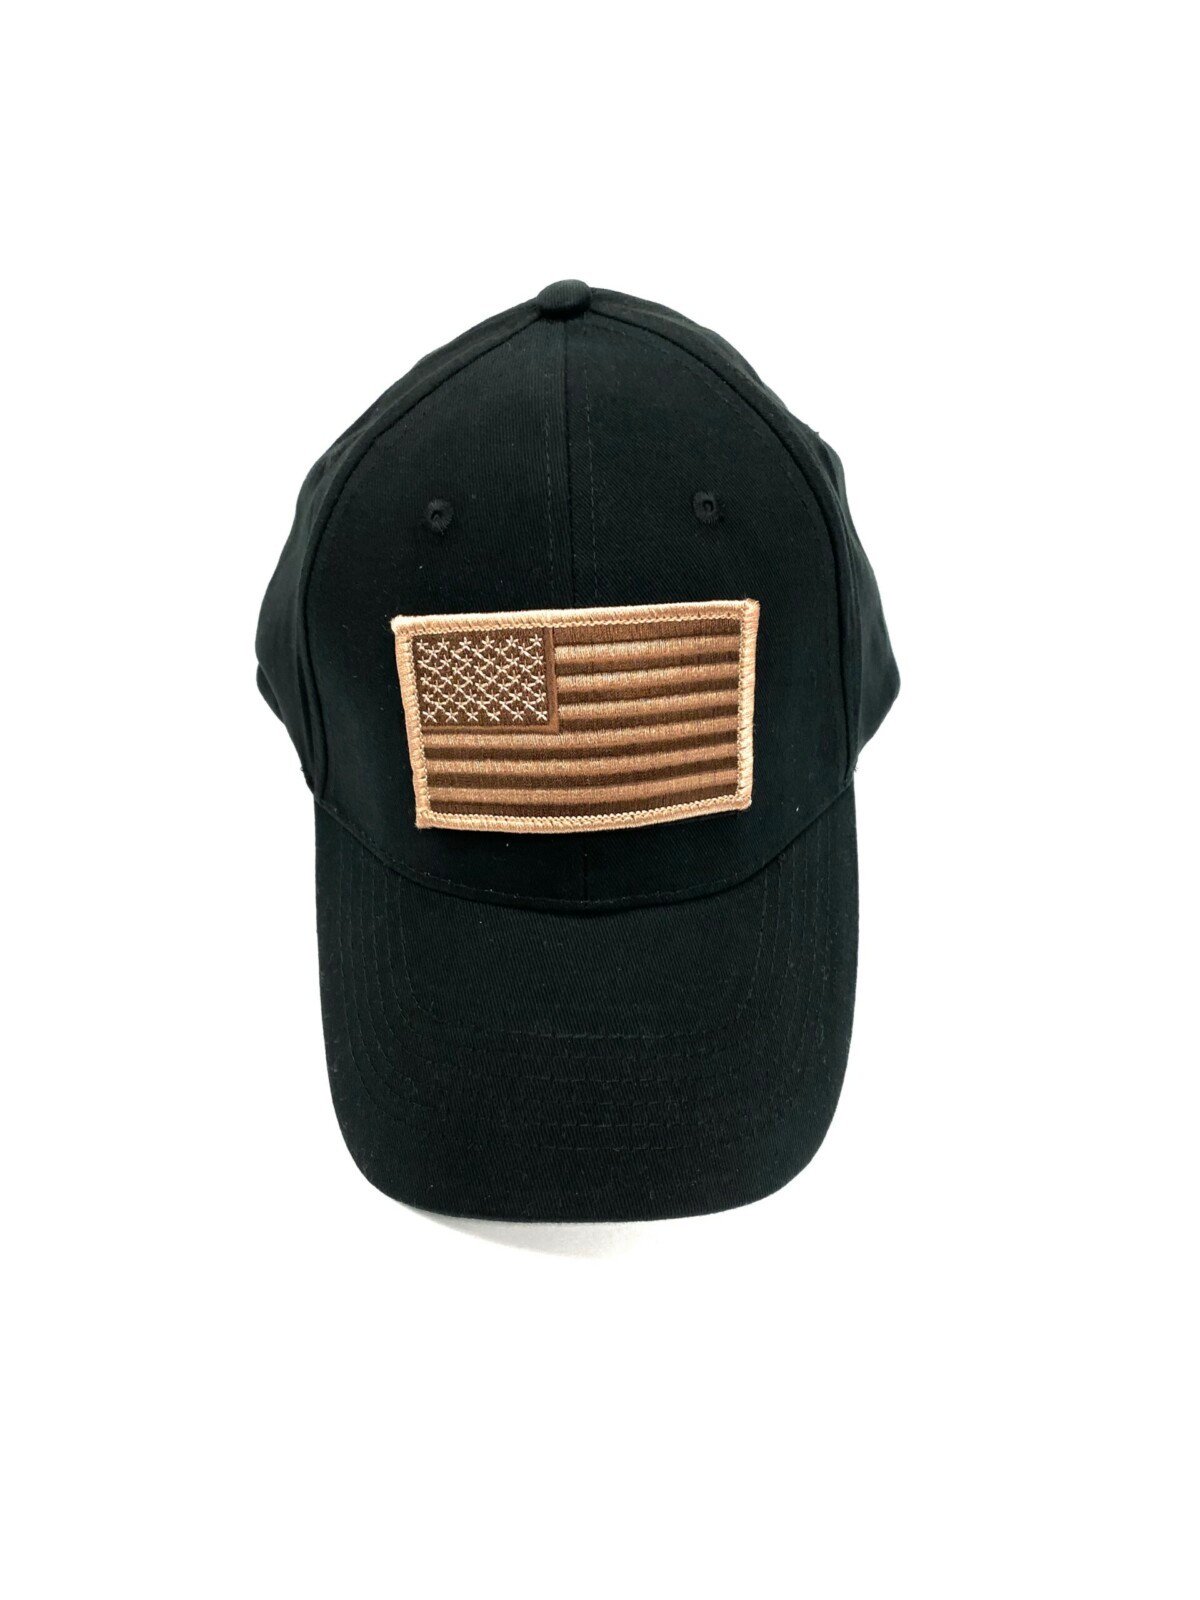 Hook & Loop Cap with Flag Patch - Military Police Regimental Association